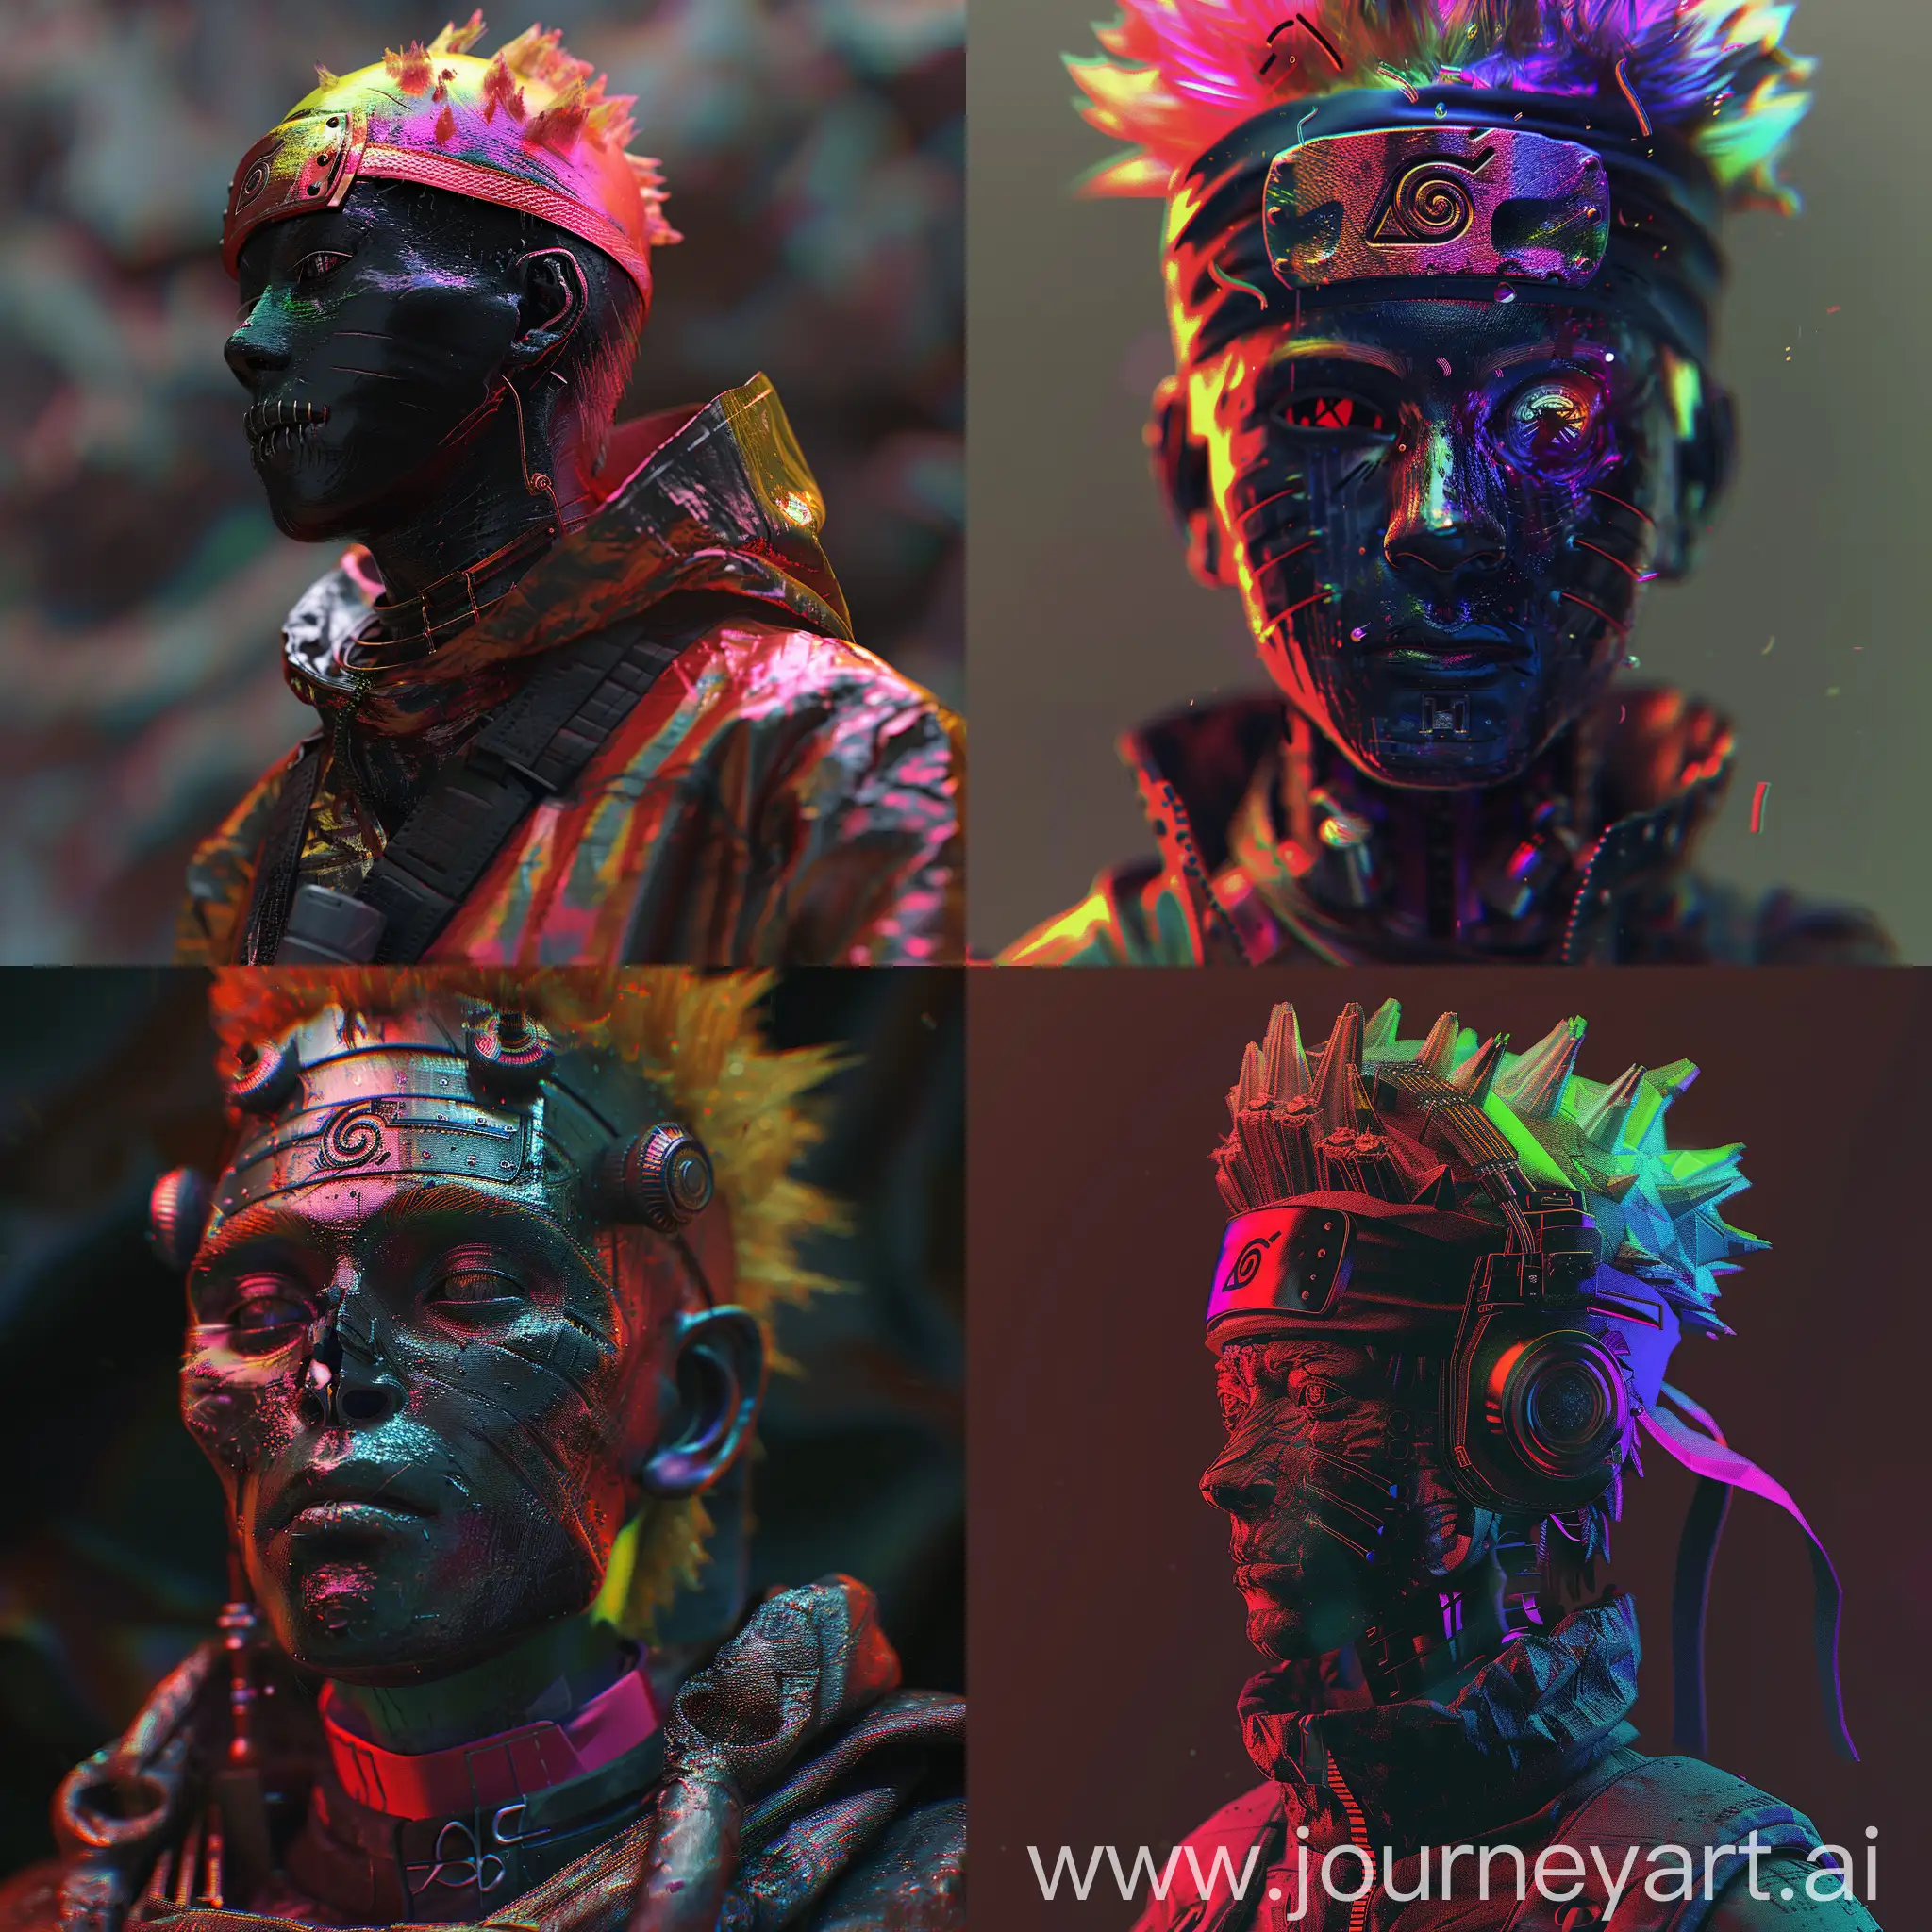 Futuristic-Cyberpunk-Mandalorian-Portrait-with-Anime-and-Rembrandt-Influences-in-Rainbow-Colors